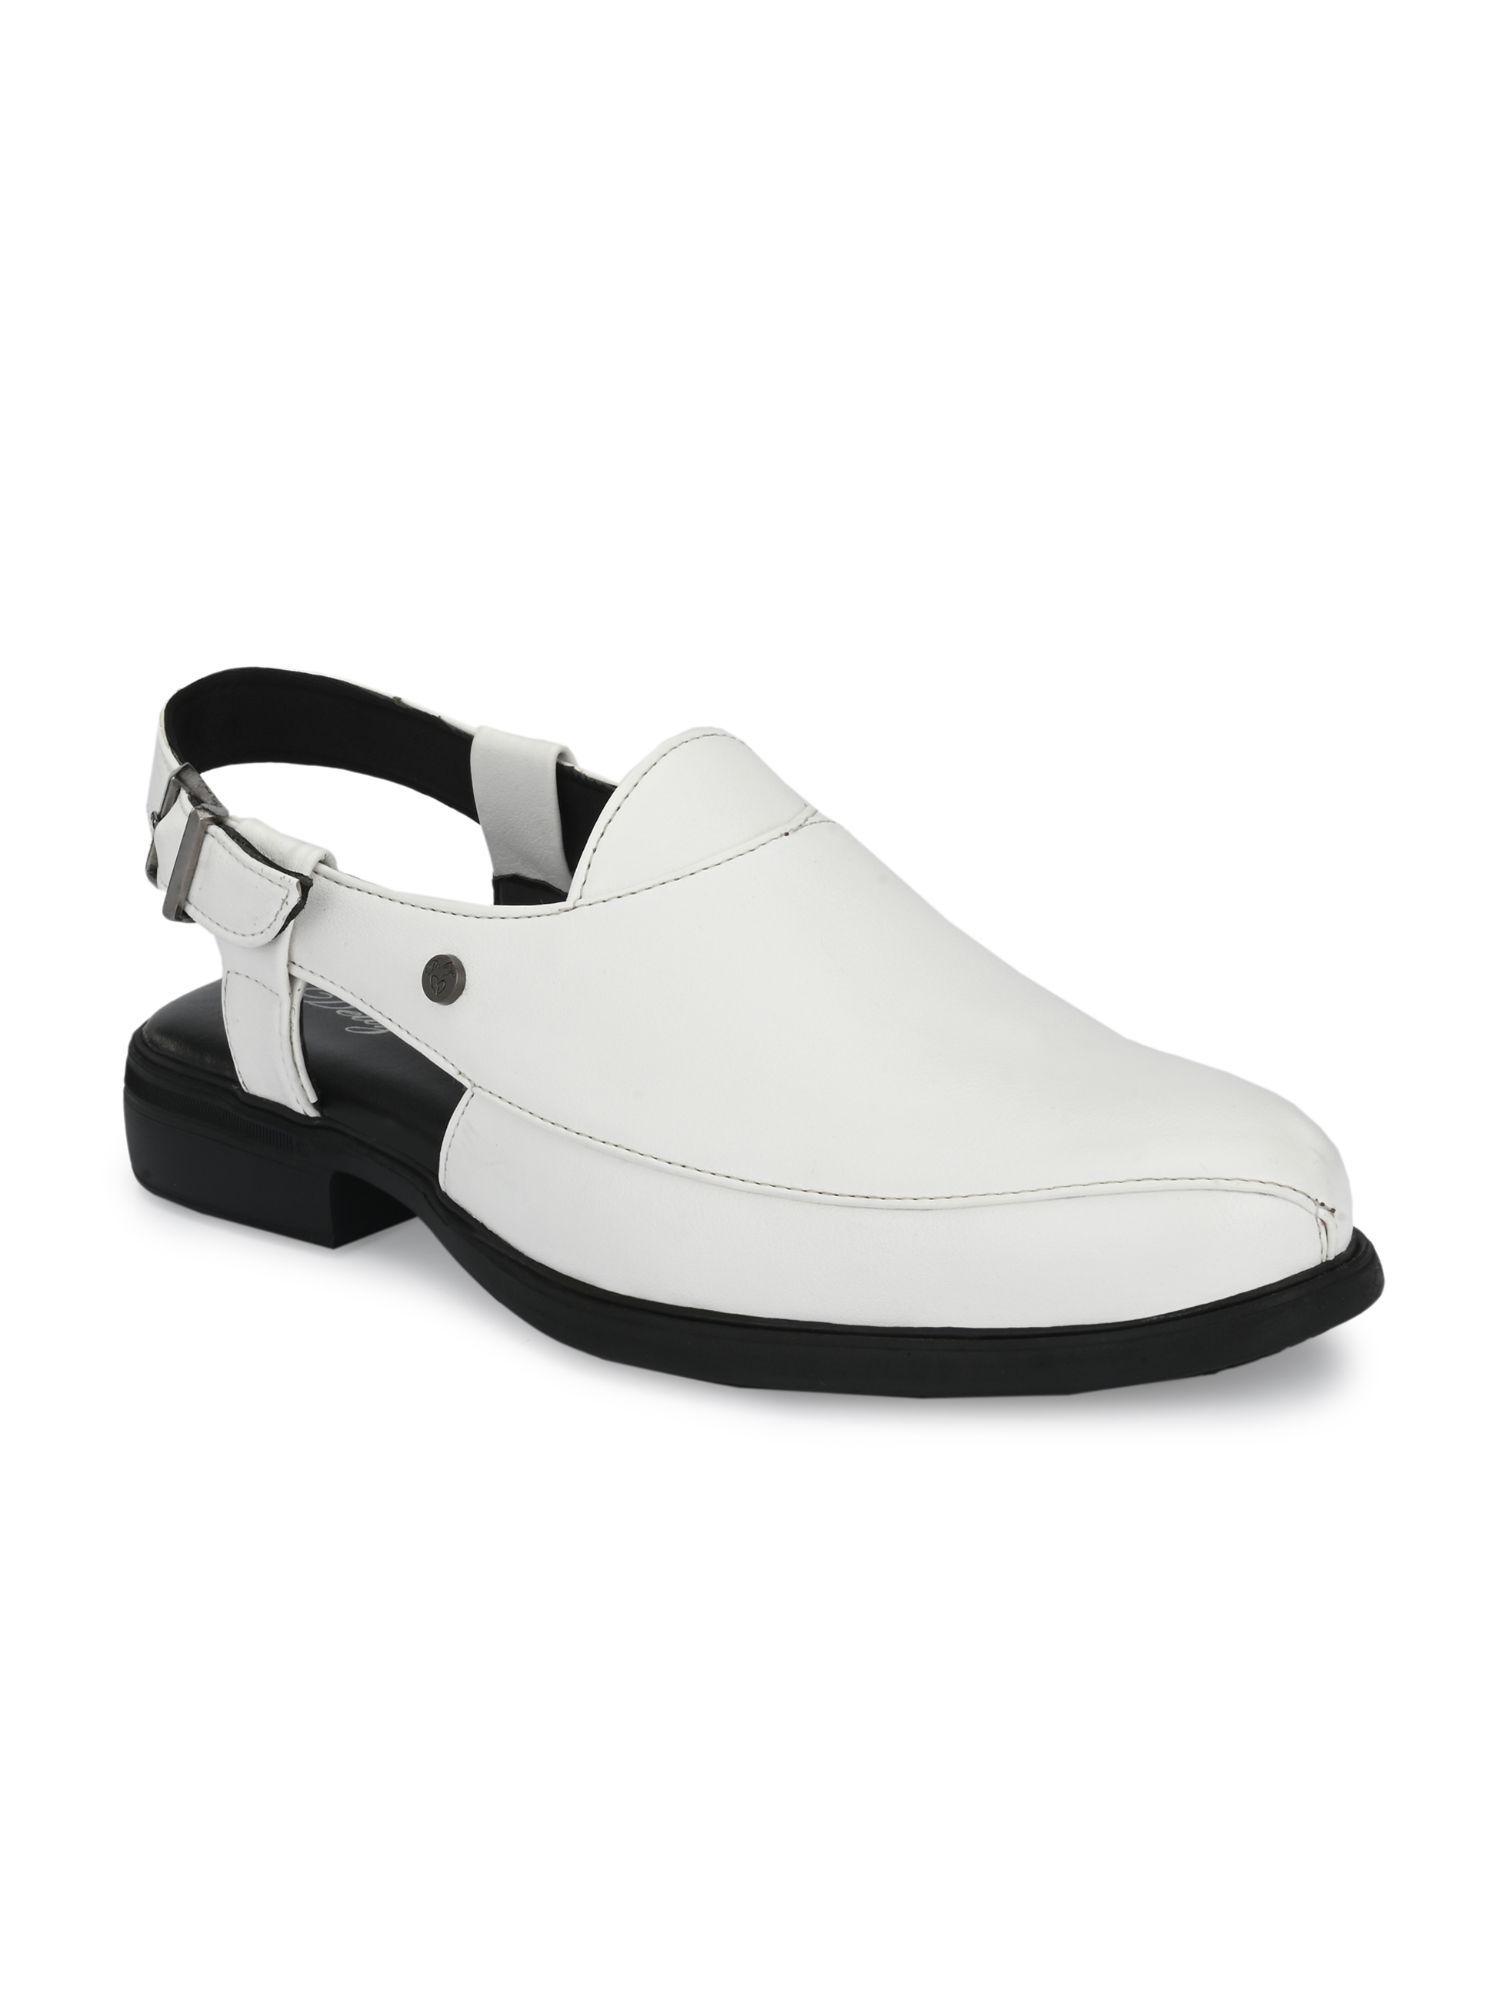 mens white solid roman casual sandals